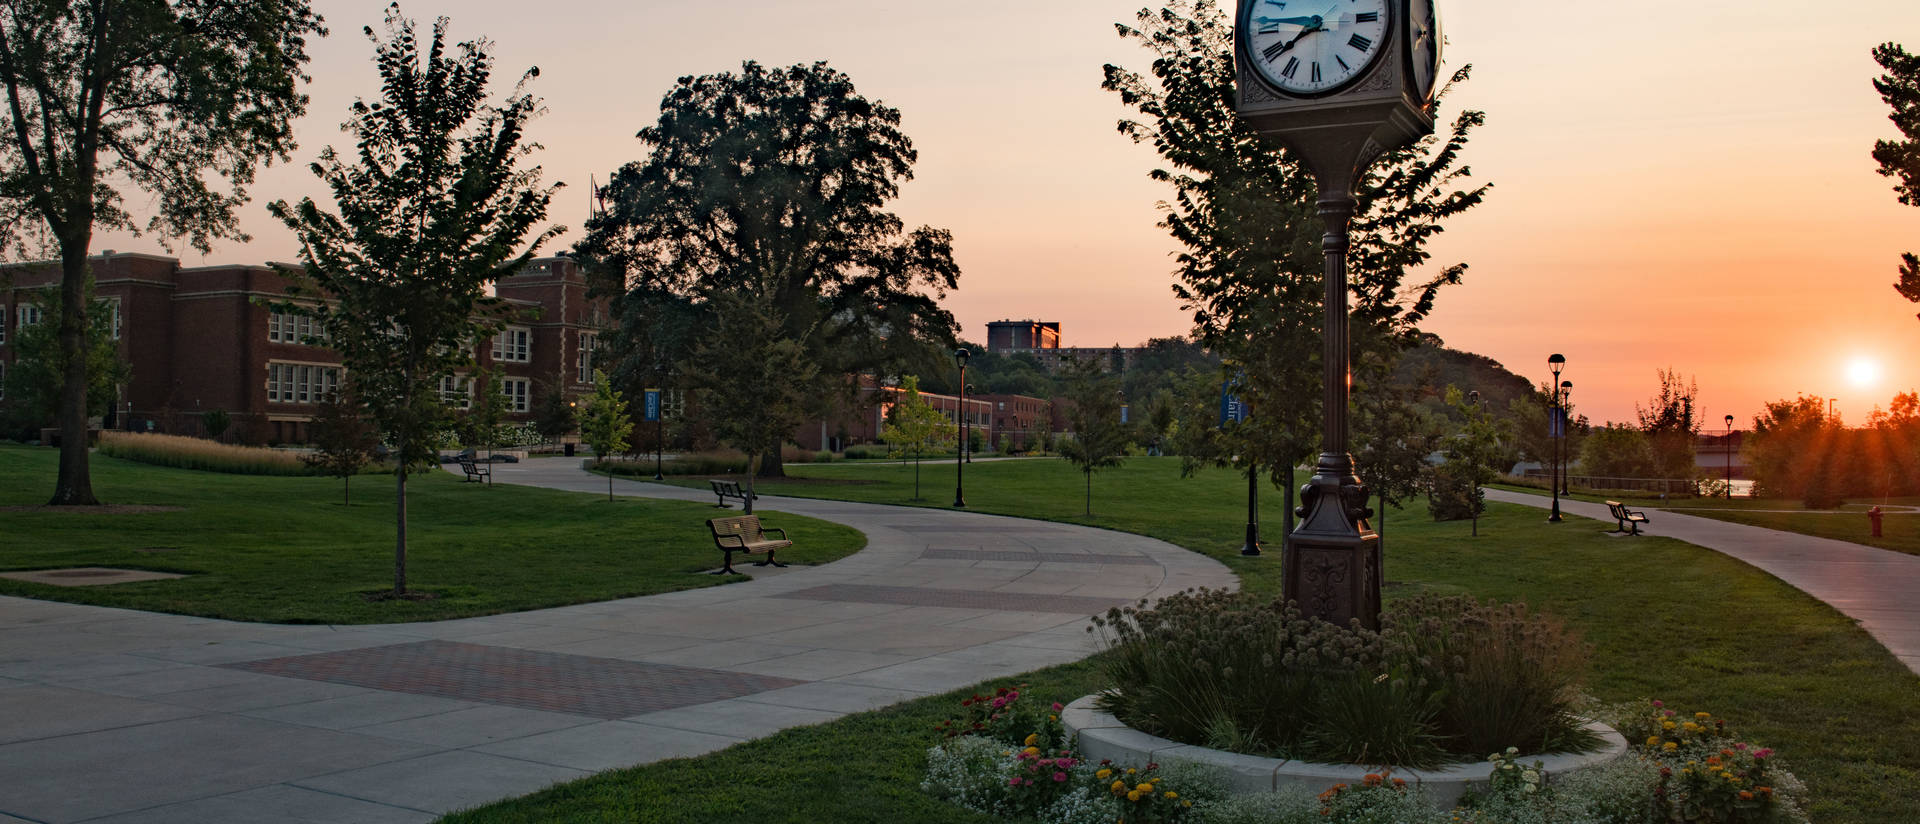 Campus beauty picture showing Schofield Hall and the clock tower.